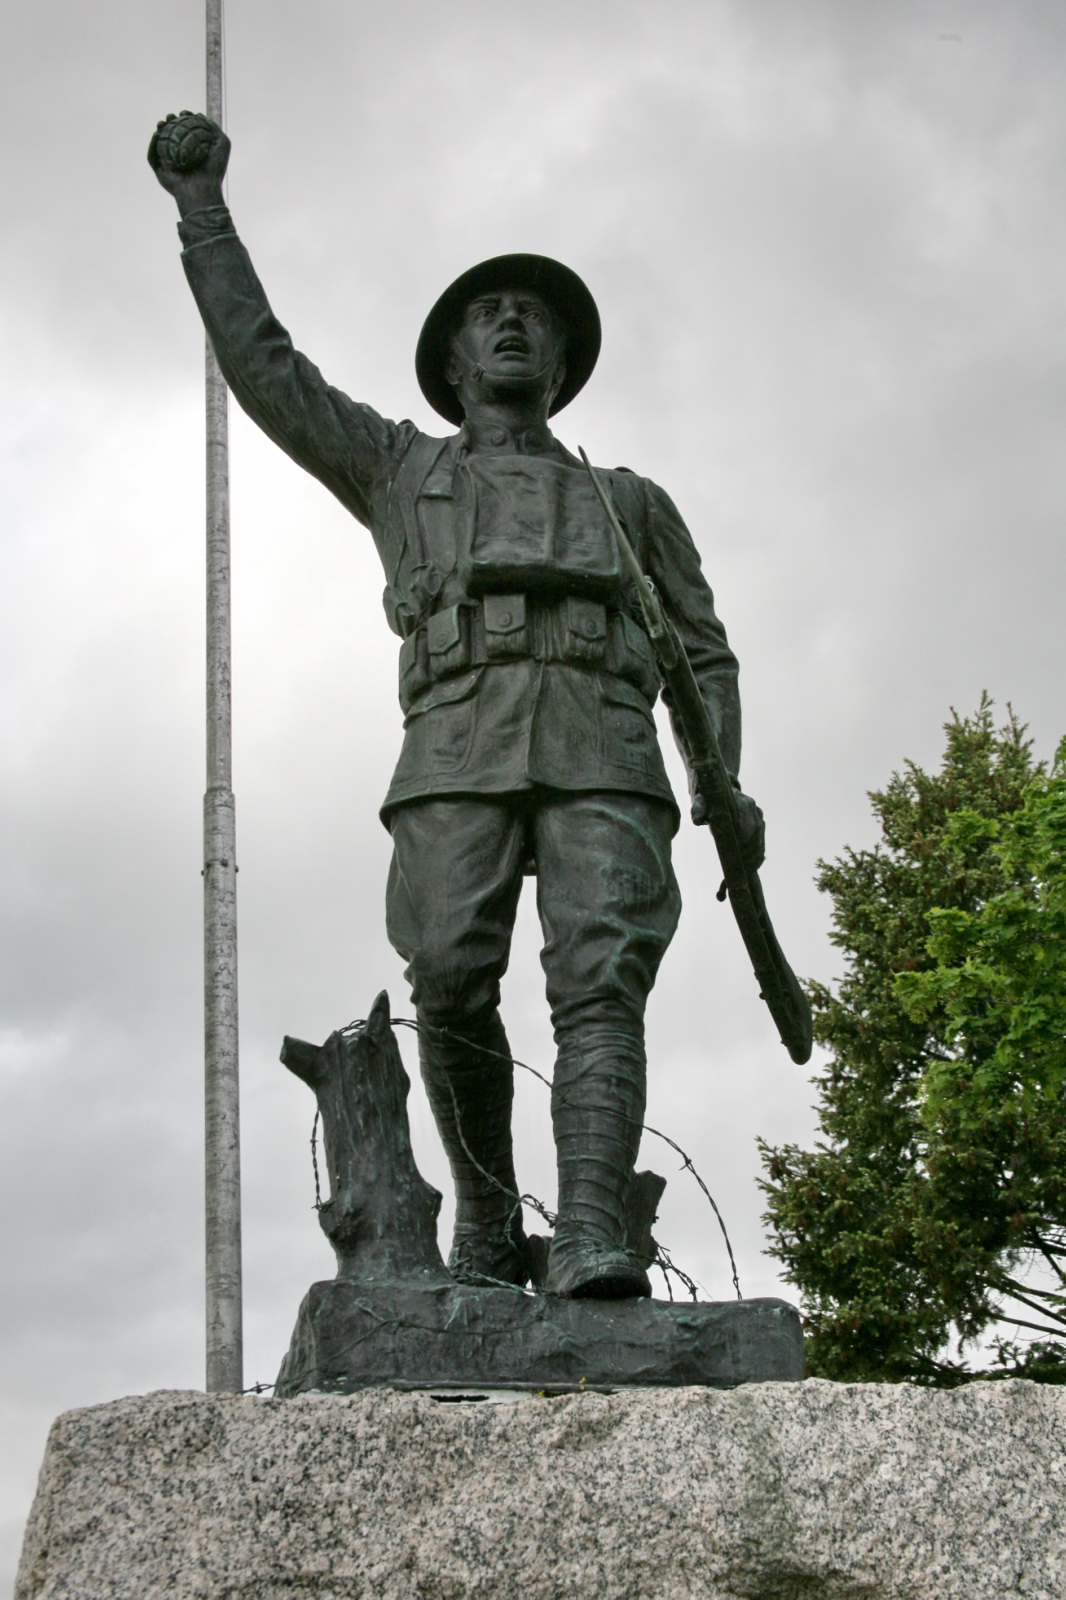 a statue of a man dressed in military uniform